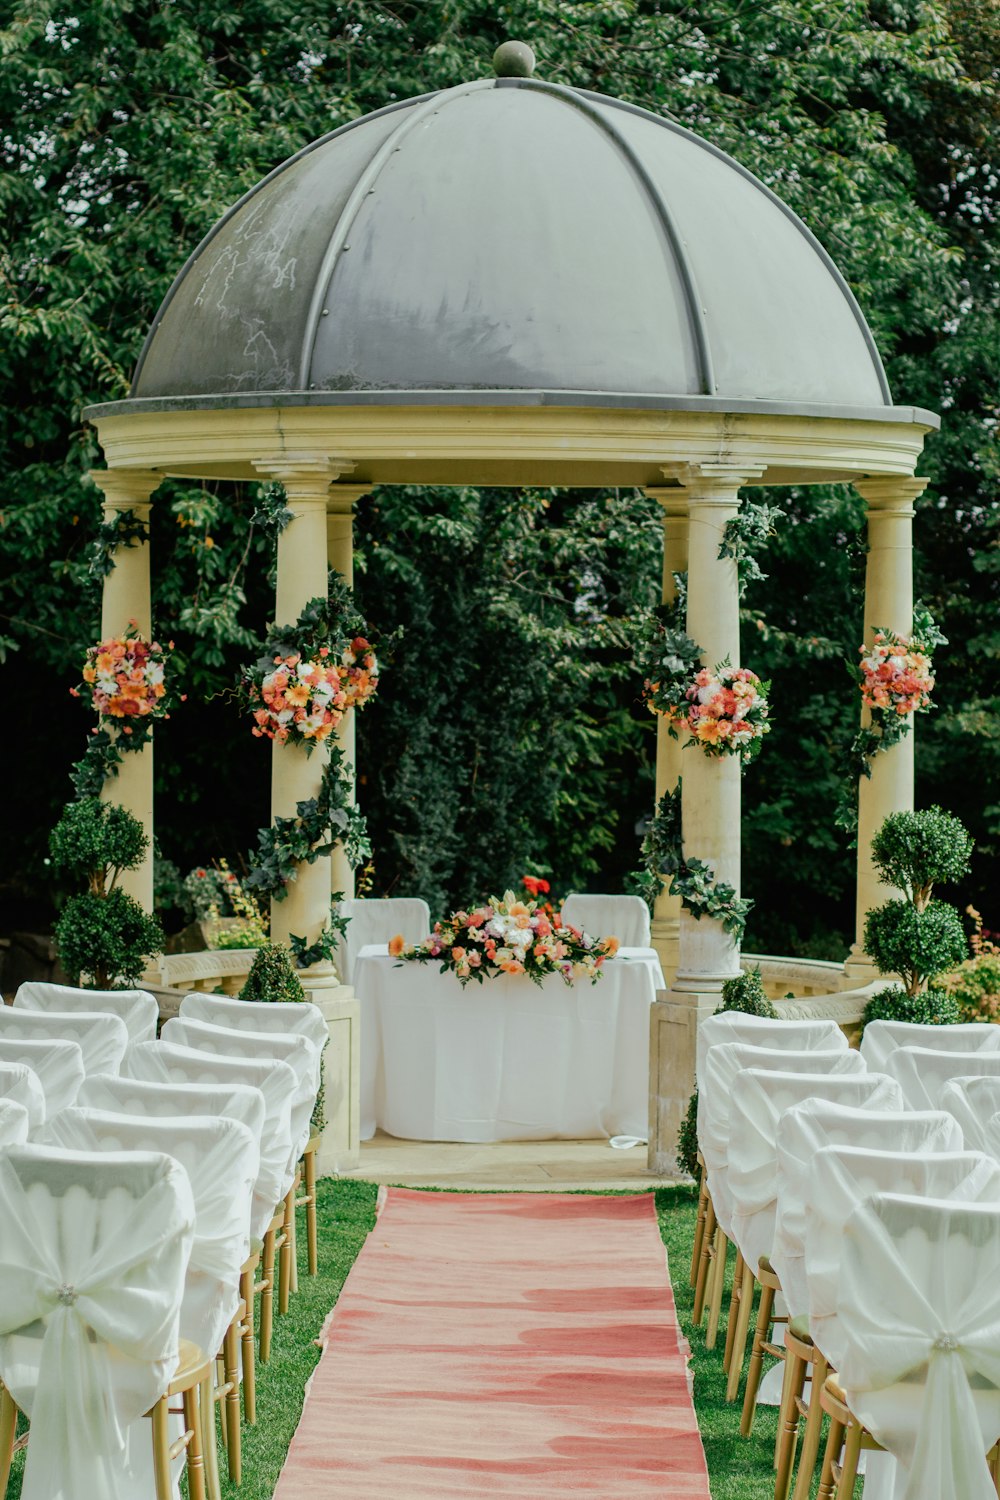 Wedding Hall Pictures | Download Free Images on Unsplash